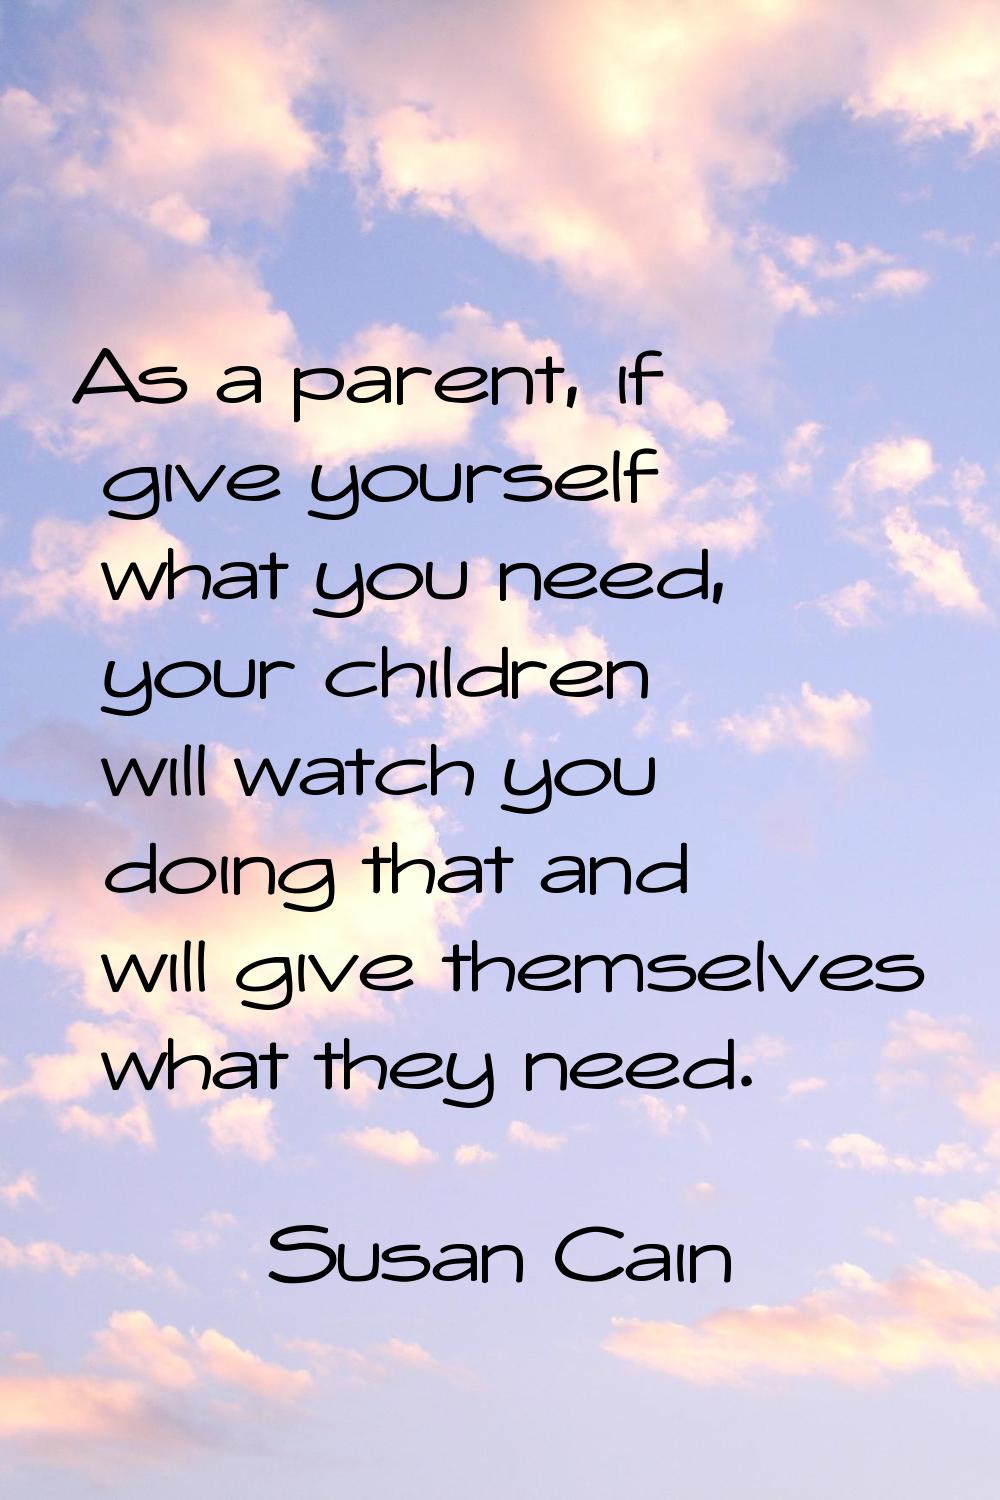 As a parent, if give yourself what you need, your children will watch you doing that and will give 